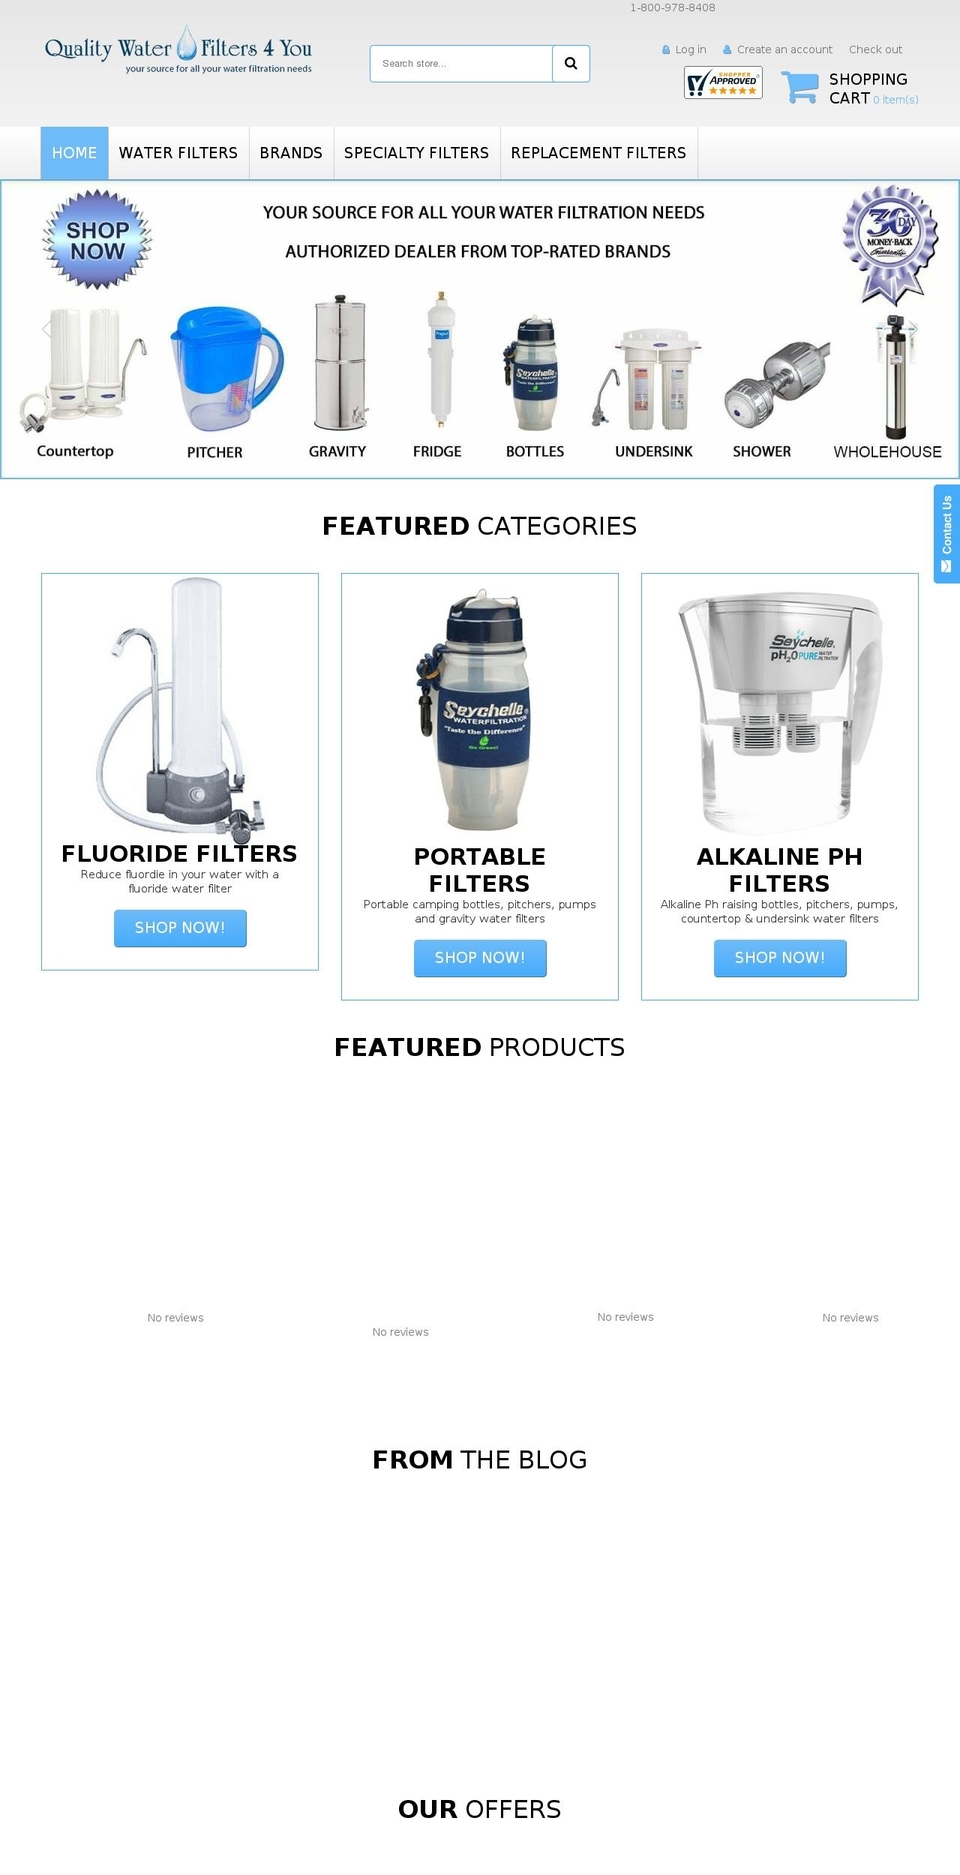 qualitywaterfilters4you.mobi shopify website screenshot